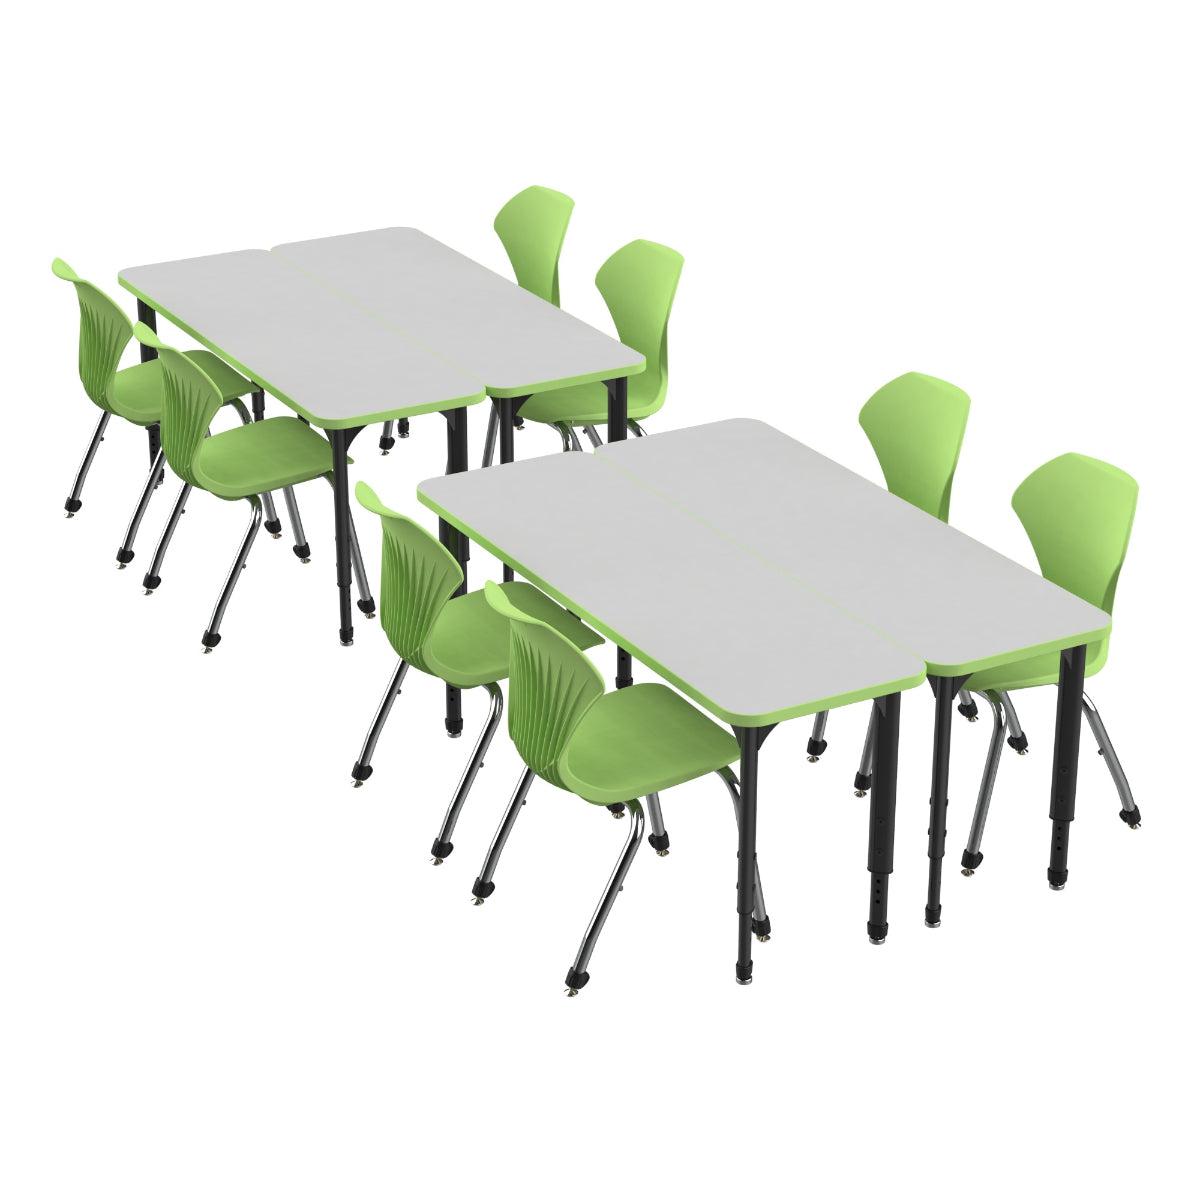 Apex Dry Erase Classroom Desk and Chair Package, 4 Rectangle 2-Student Collaborative Desks, 20" x 60", with 8 Apex Stack Chairs